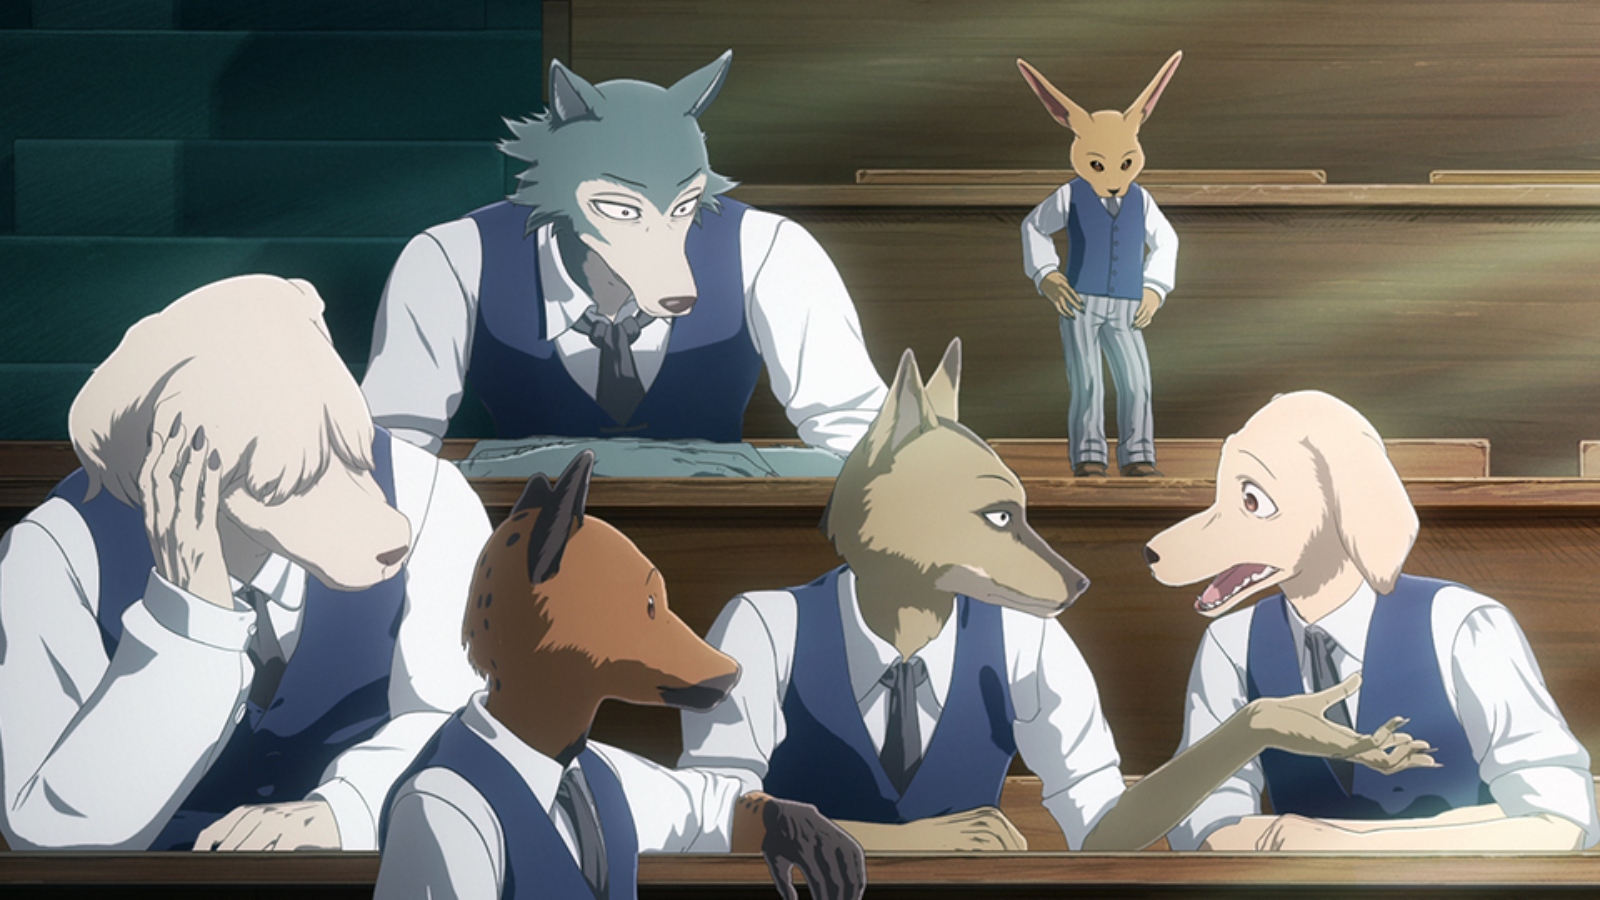 The carnivores from Beastars